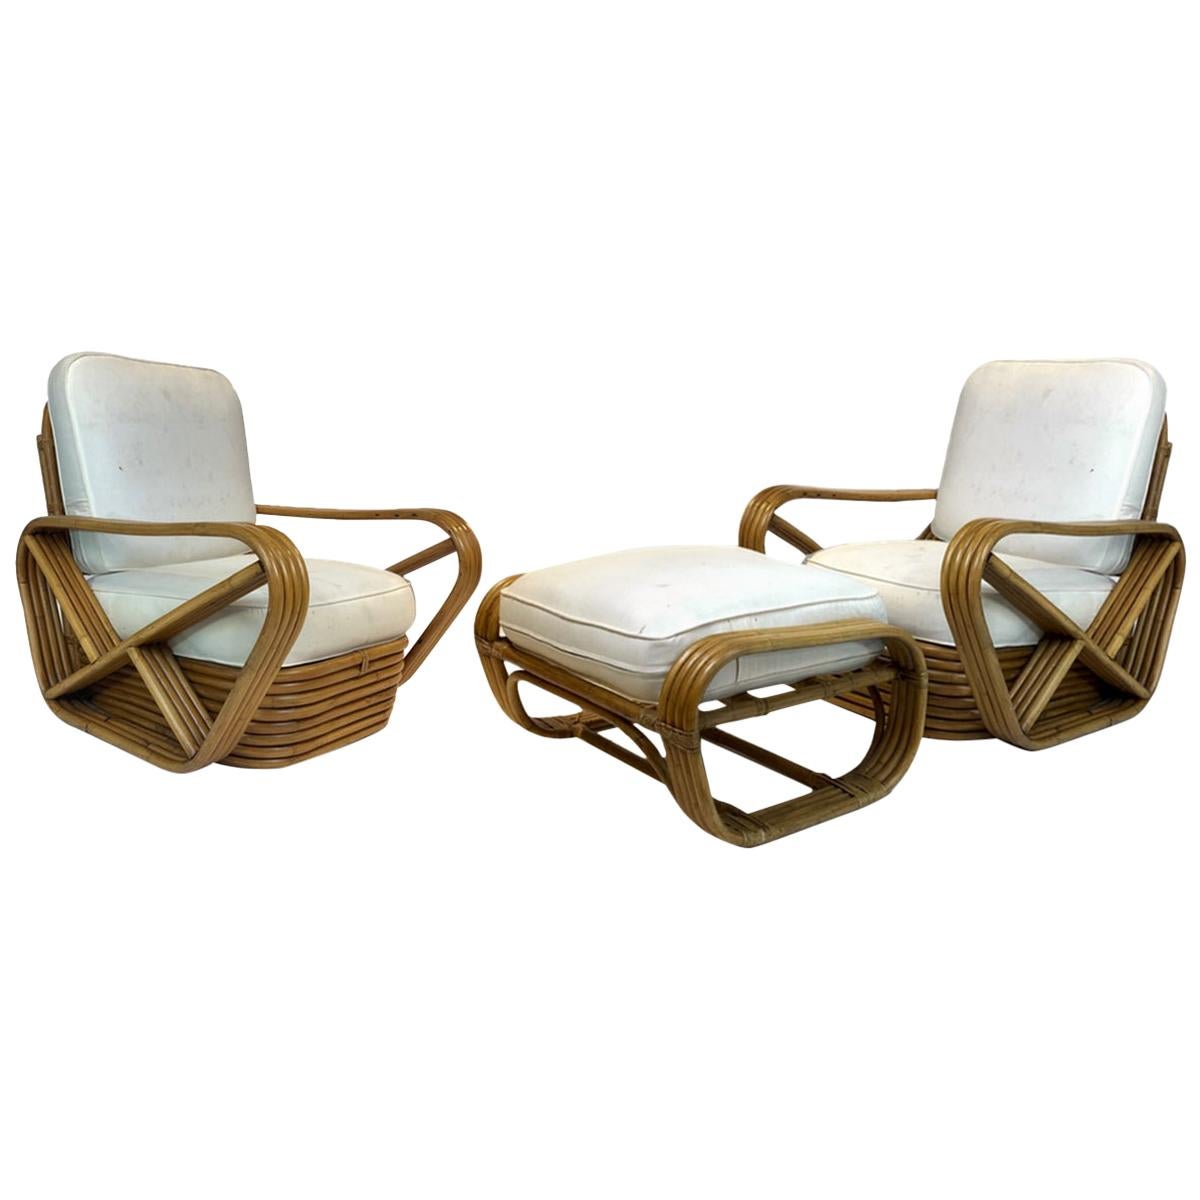 Pair of Rattan 1940s Paul Frankl Style Pretzel Chairs with Ottoman from Japan